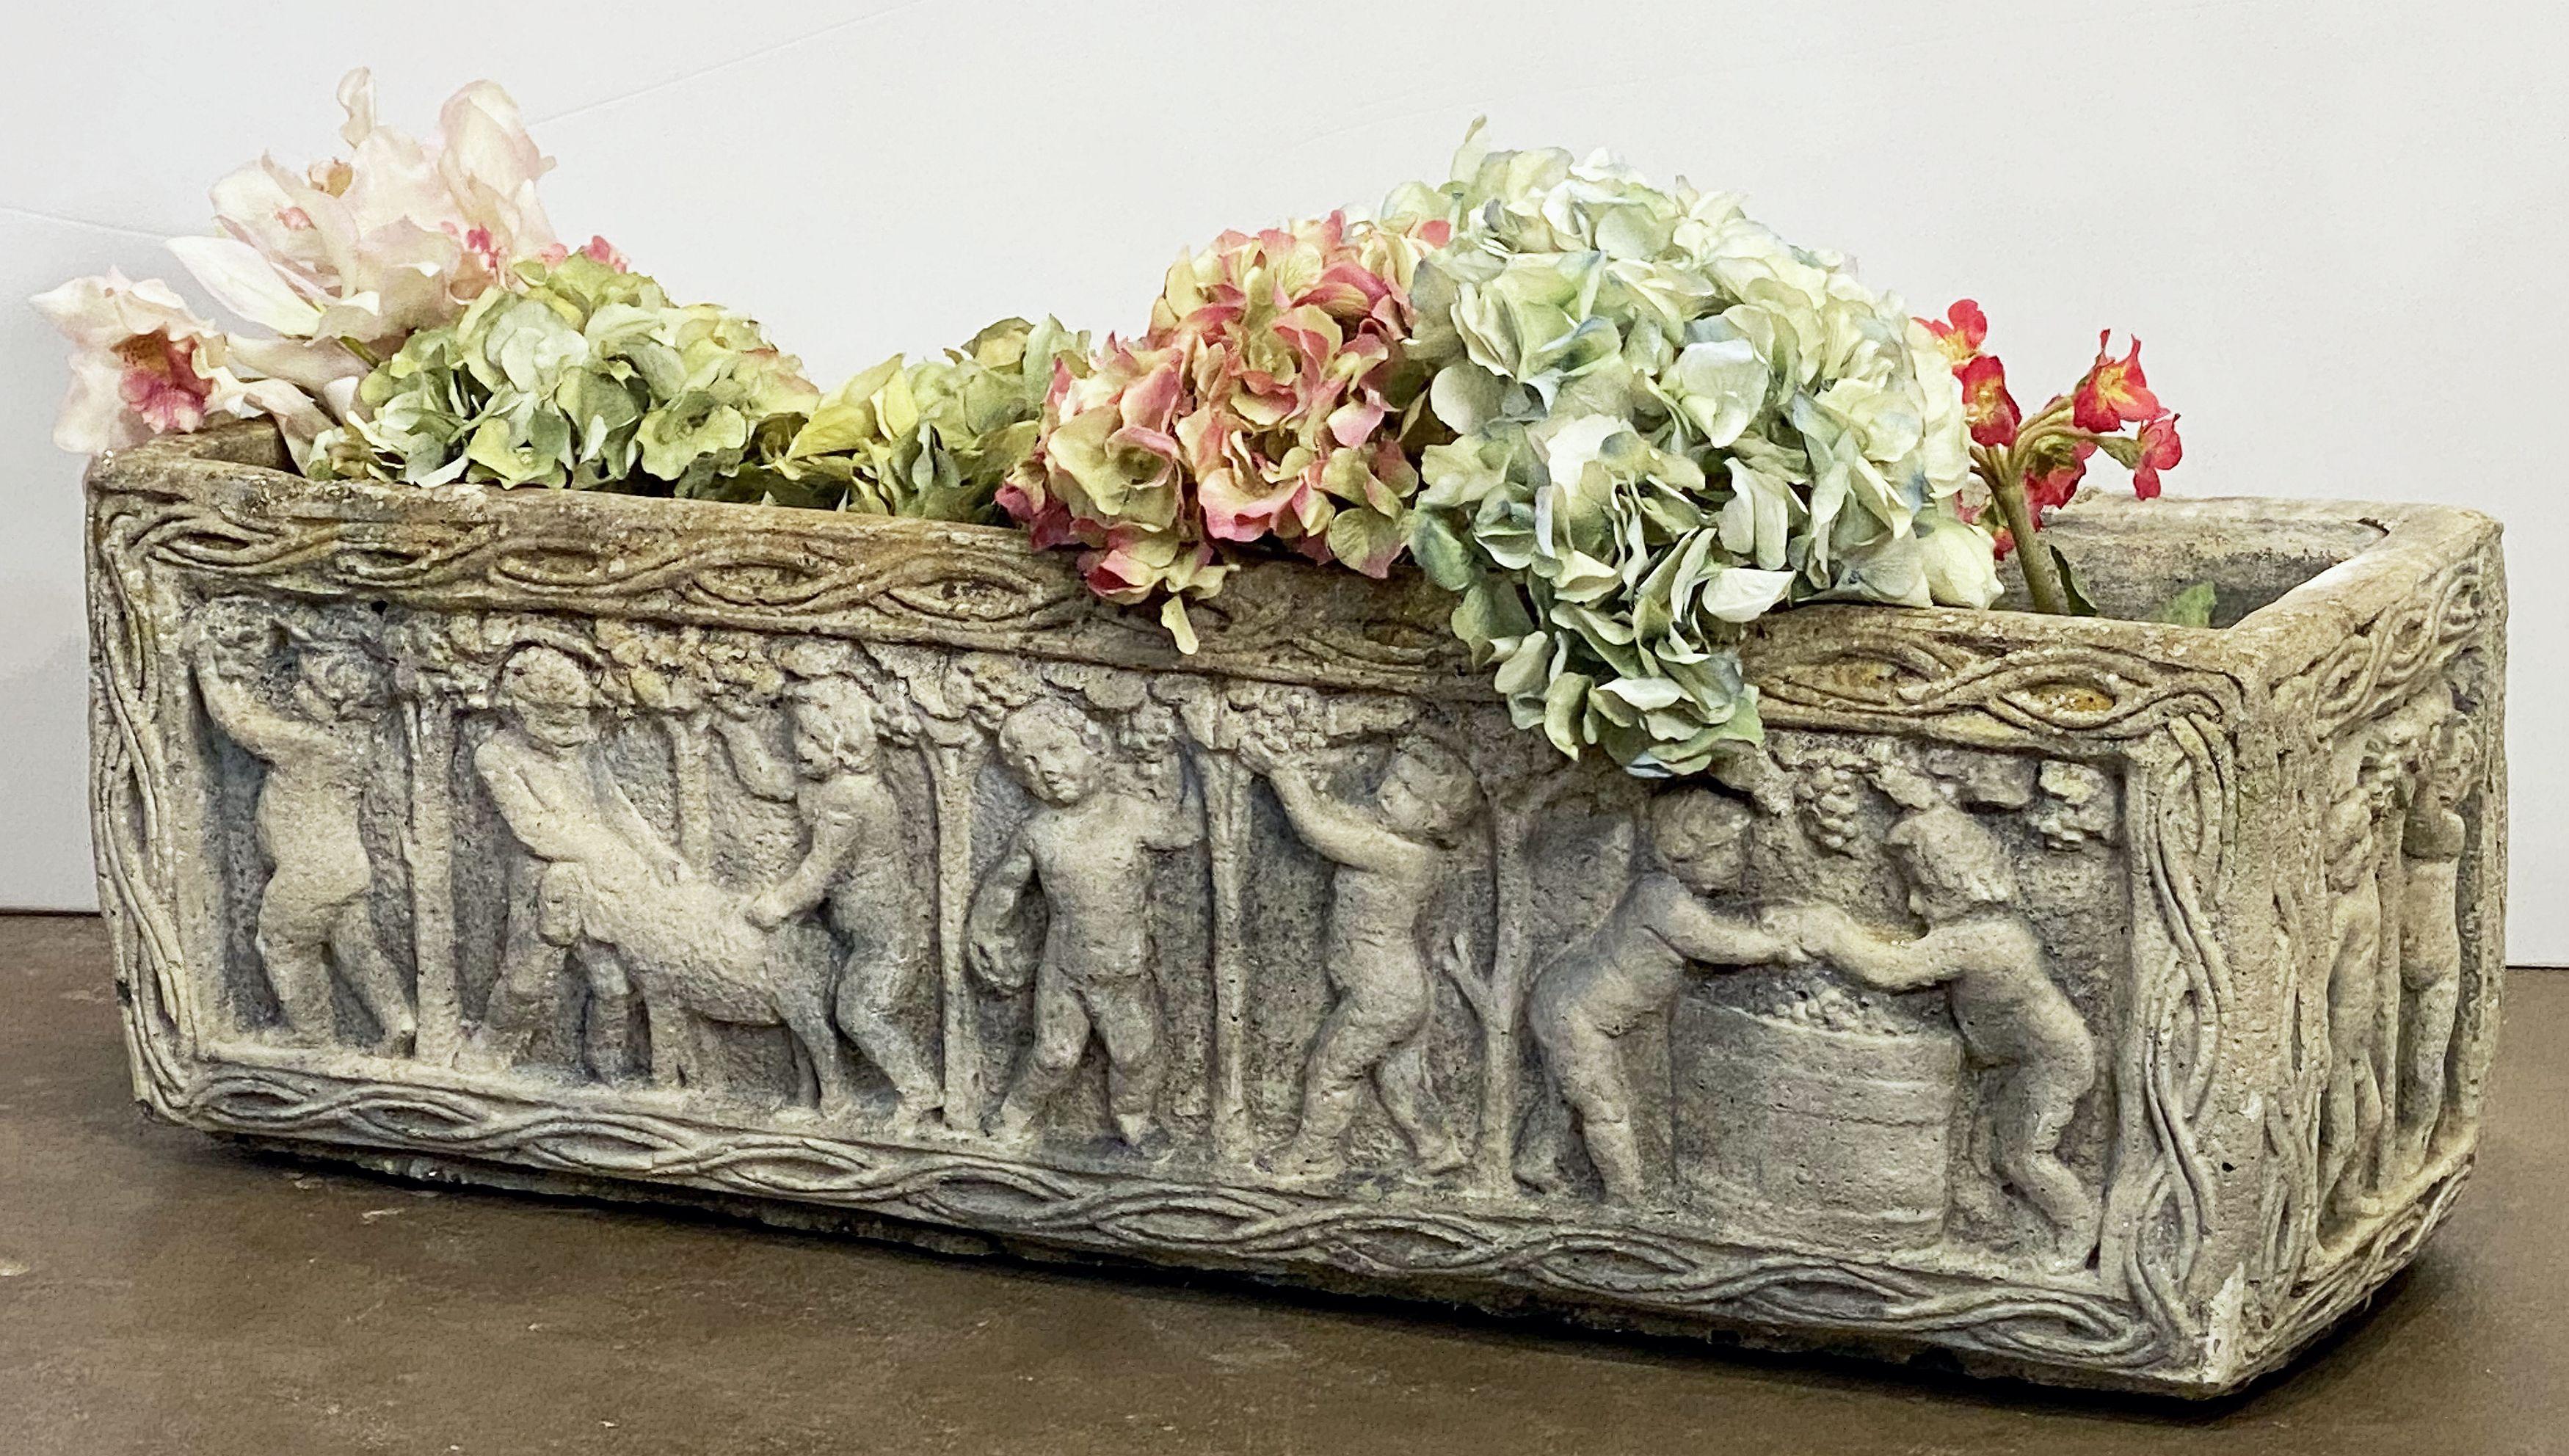 A fine English rectangular garden trough of planter with an ornamental Classical relief of cherubs on all four sides.